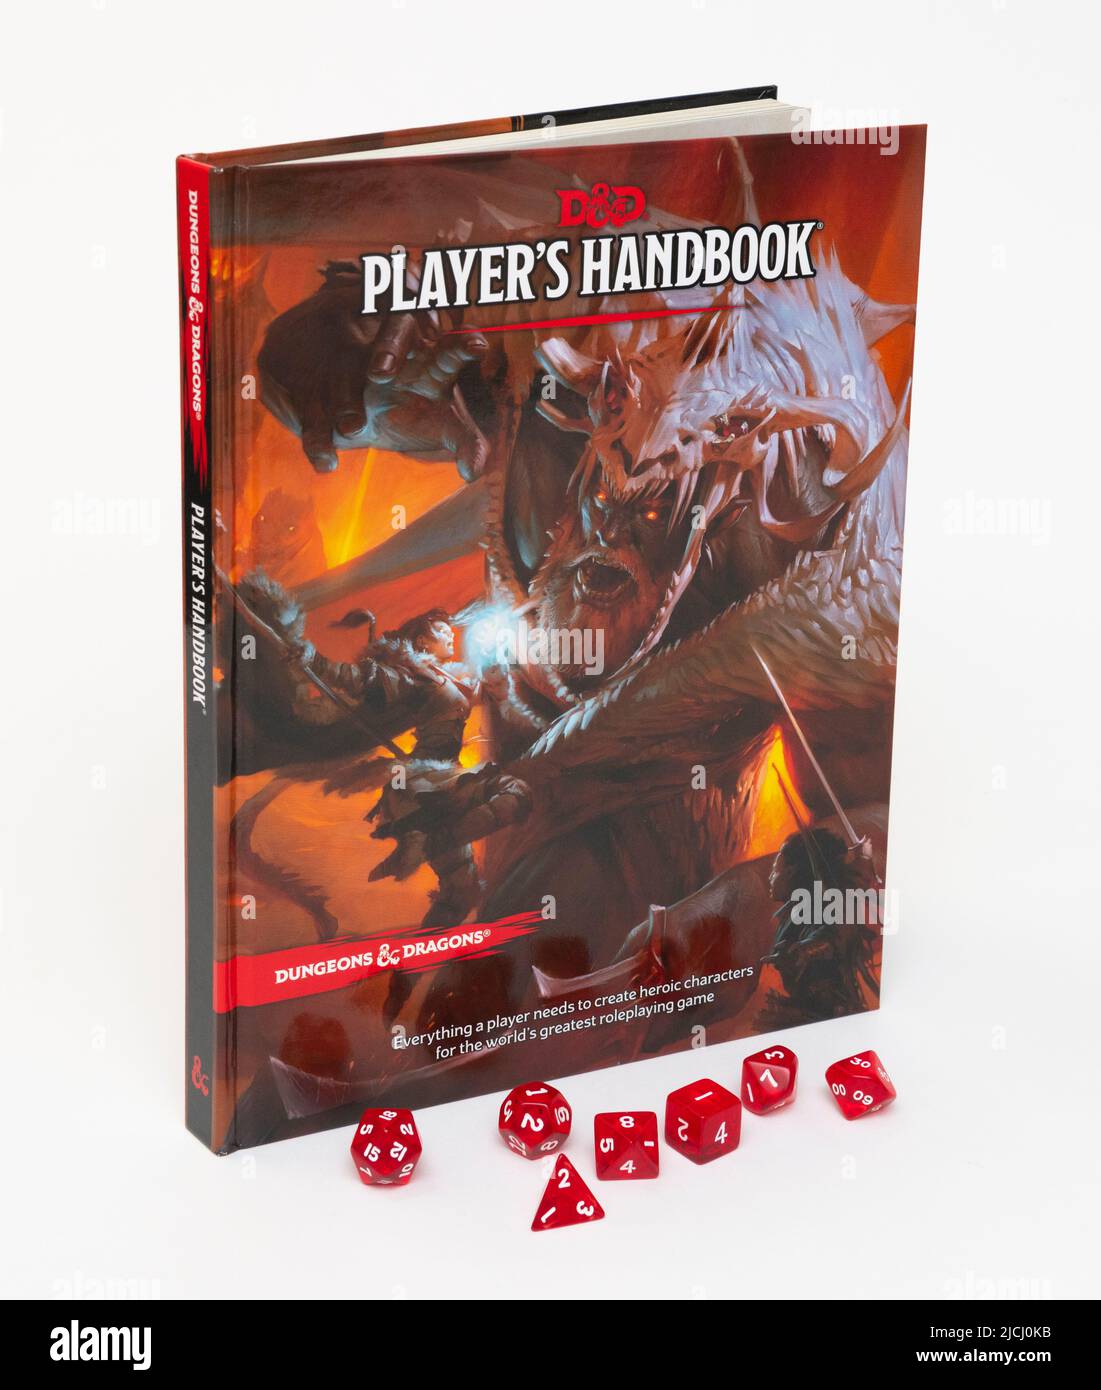 Manuale del giocatore di Dungeons and Dragons. Foto Stock